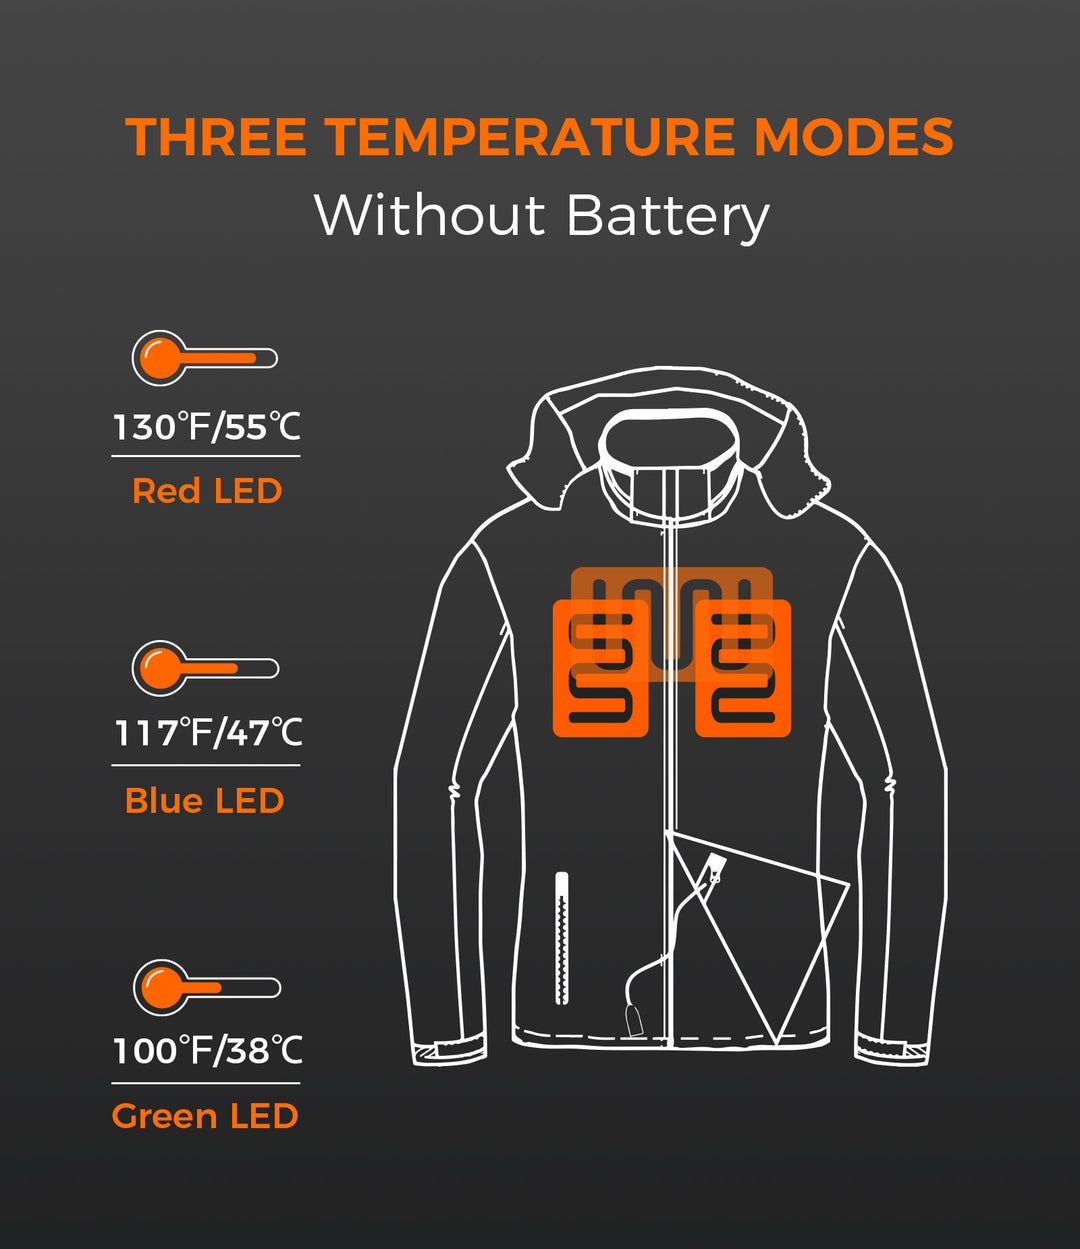 Women's Heated Jacket, Waterproof Electric Insulated Winter Coat with Detachable Hood, No Battery Pack